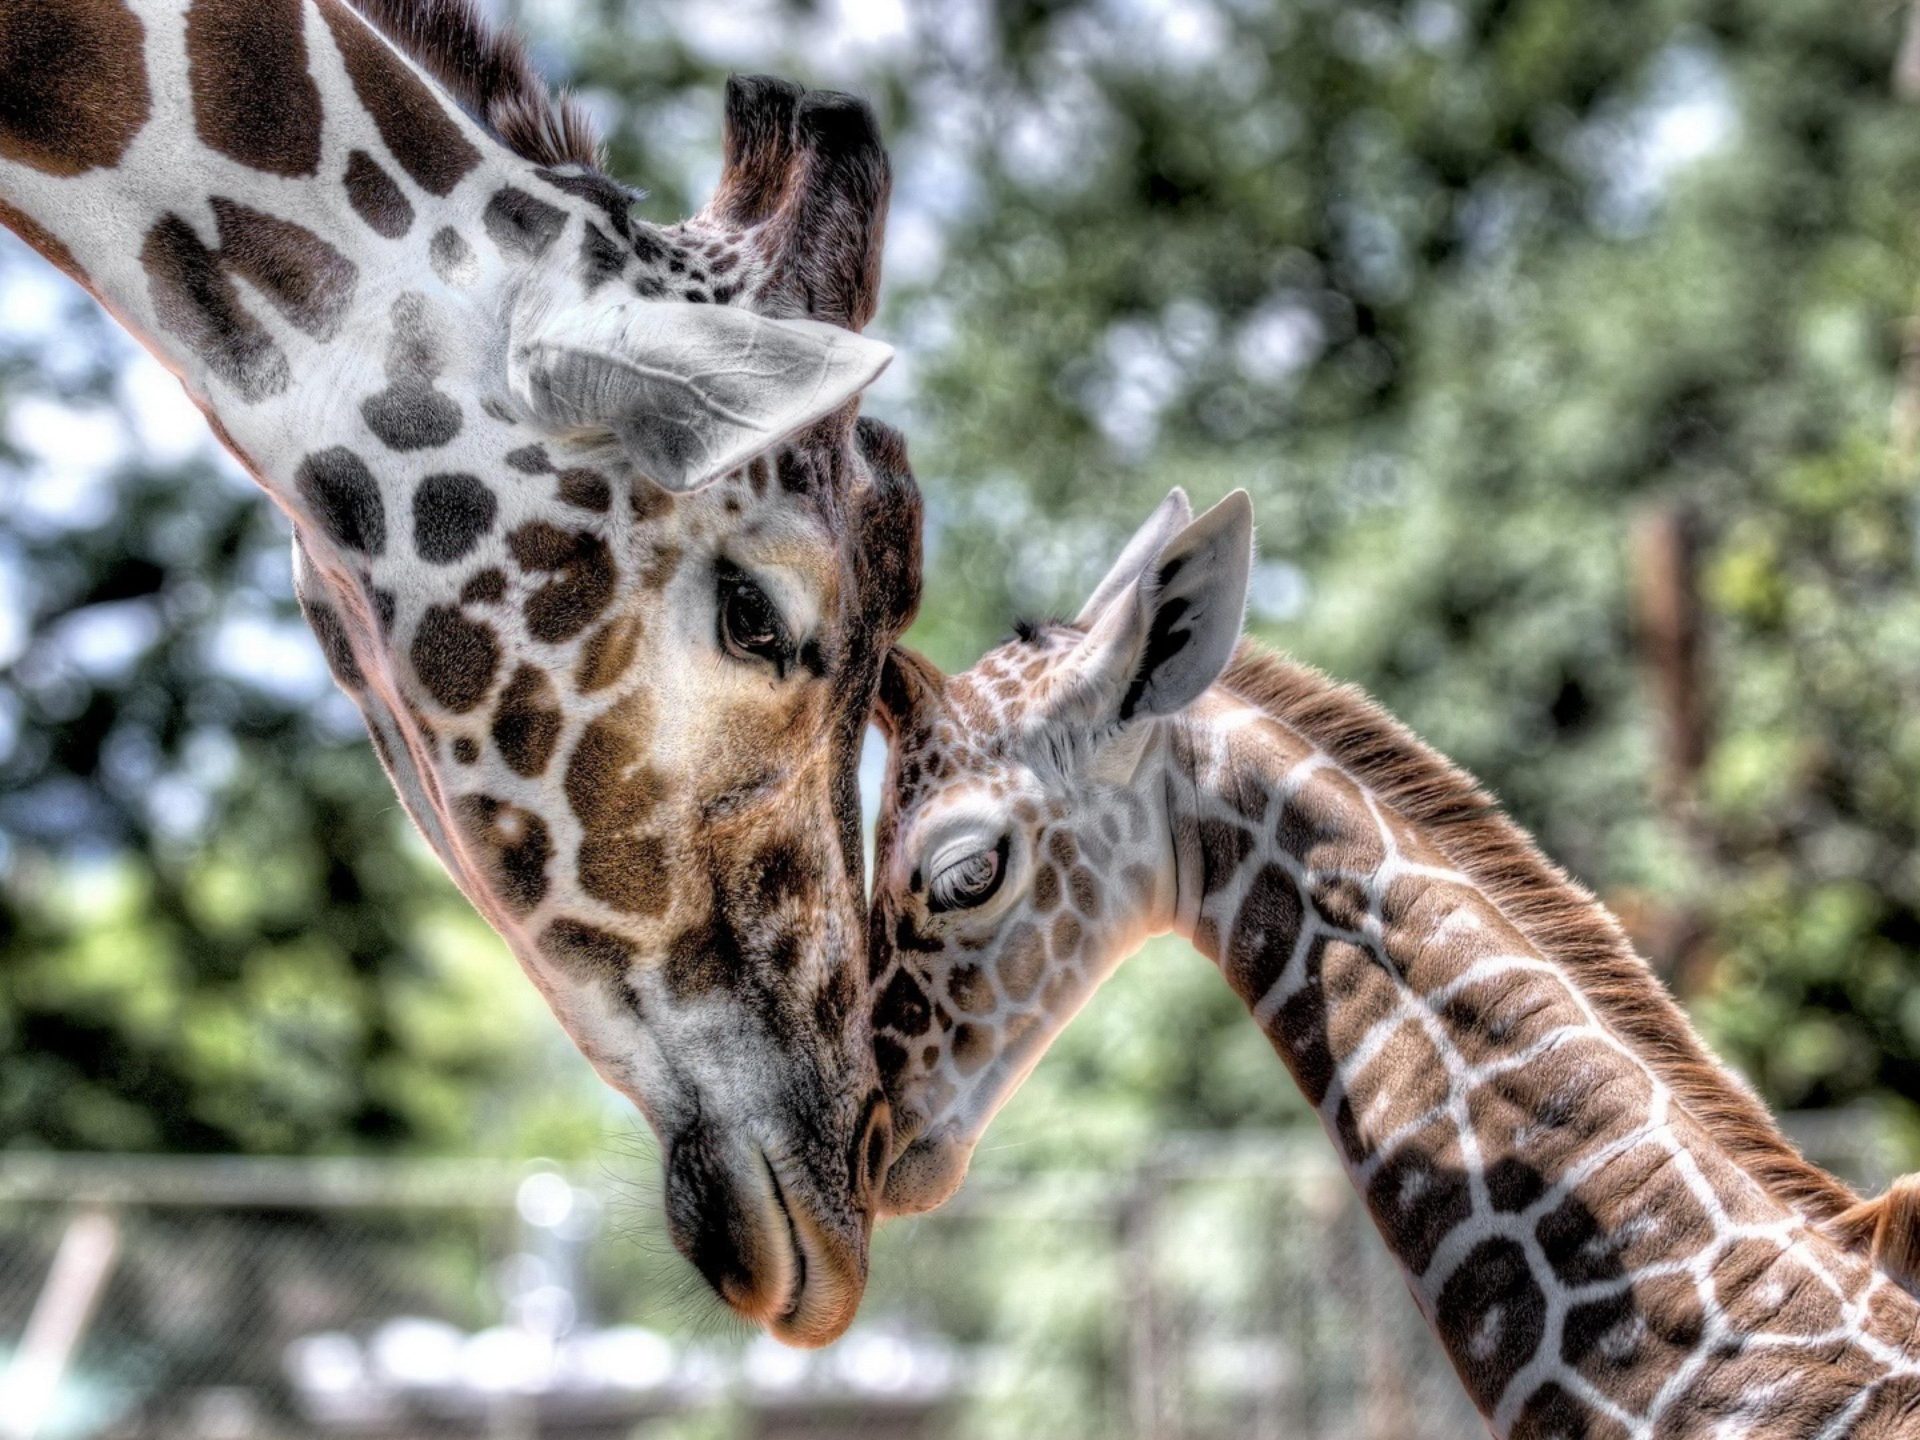 Animals giraffe mother cub baby tenderness hd wallpapers for mobile phones and laptops x